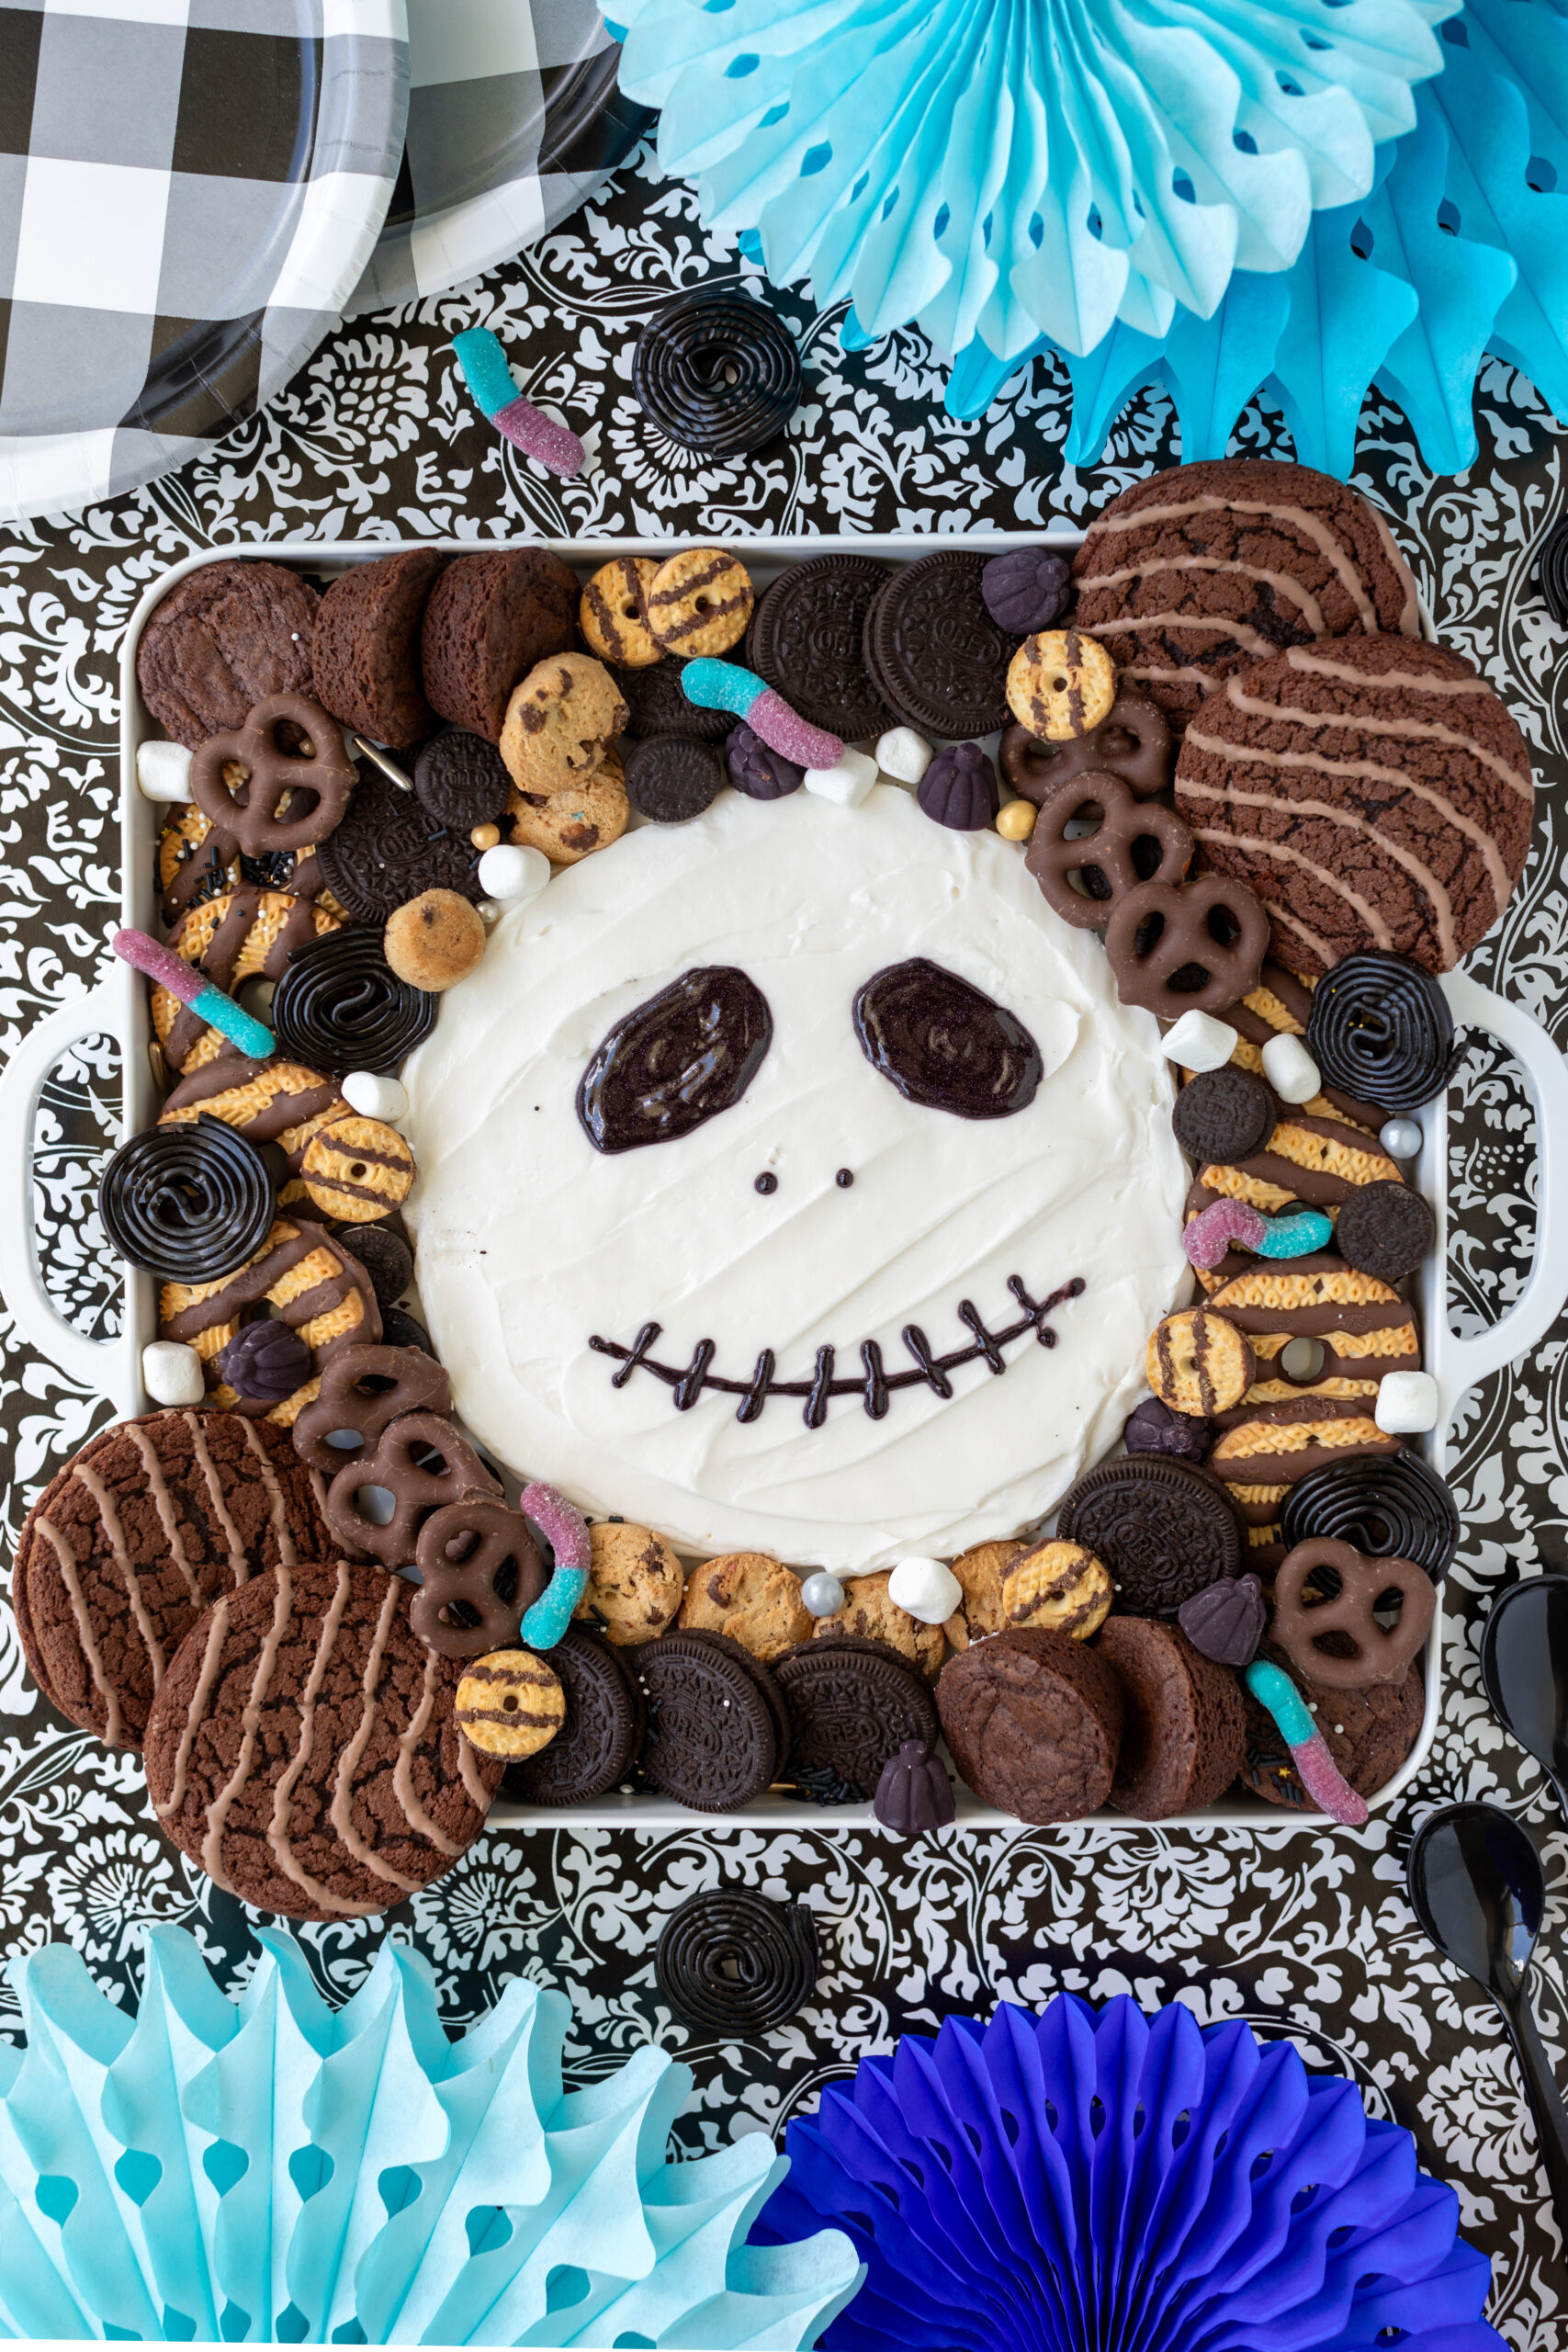 jack skellington frosting board served with cookies, brownies and dippable treats